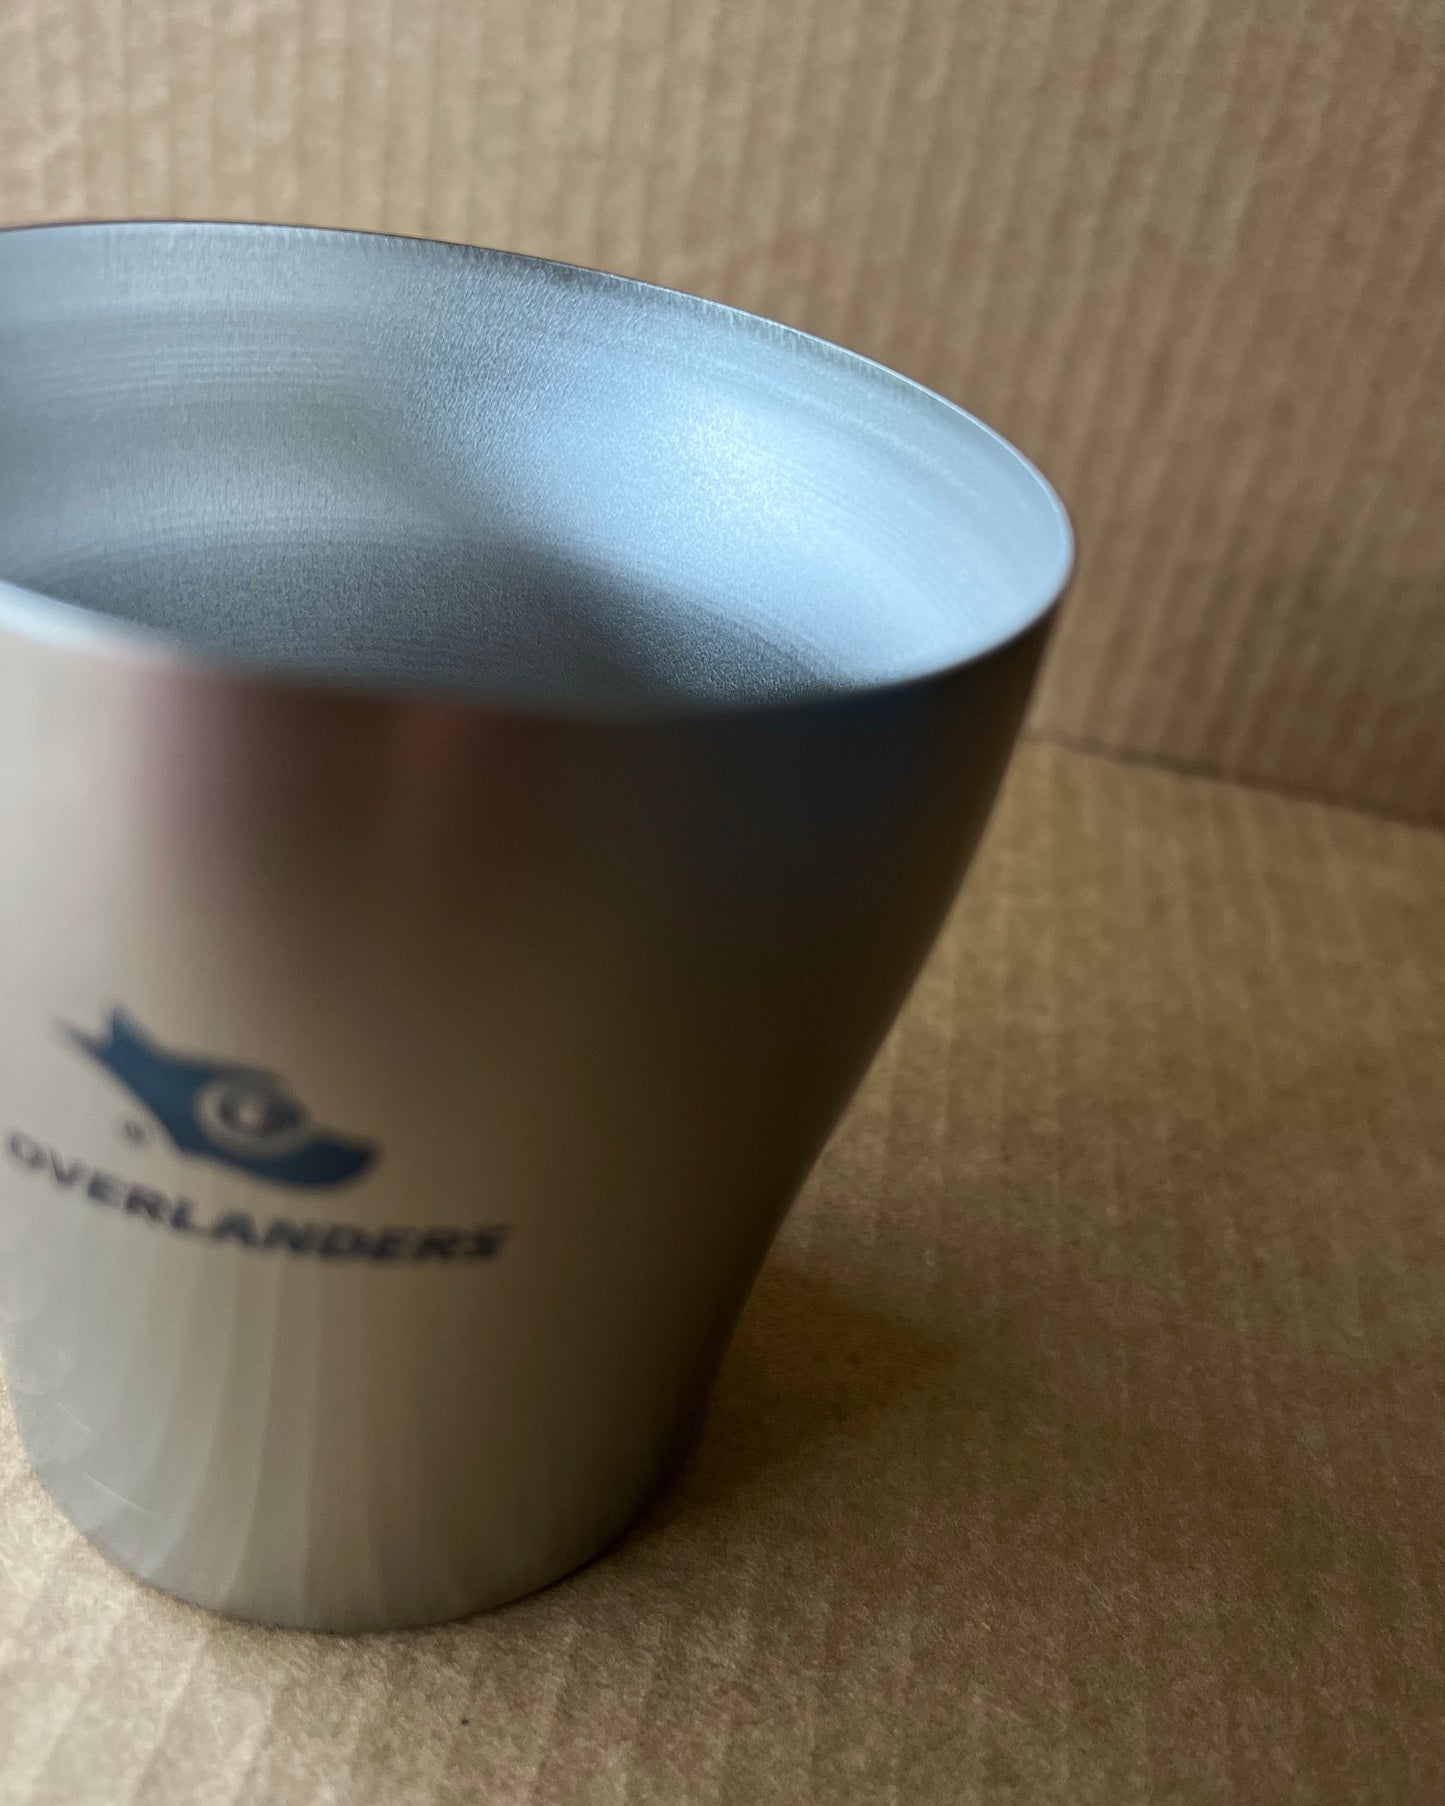 Overlanders Titanium Double-wall Cup, made in Japan